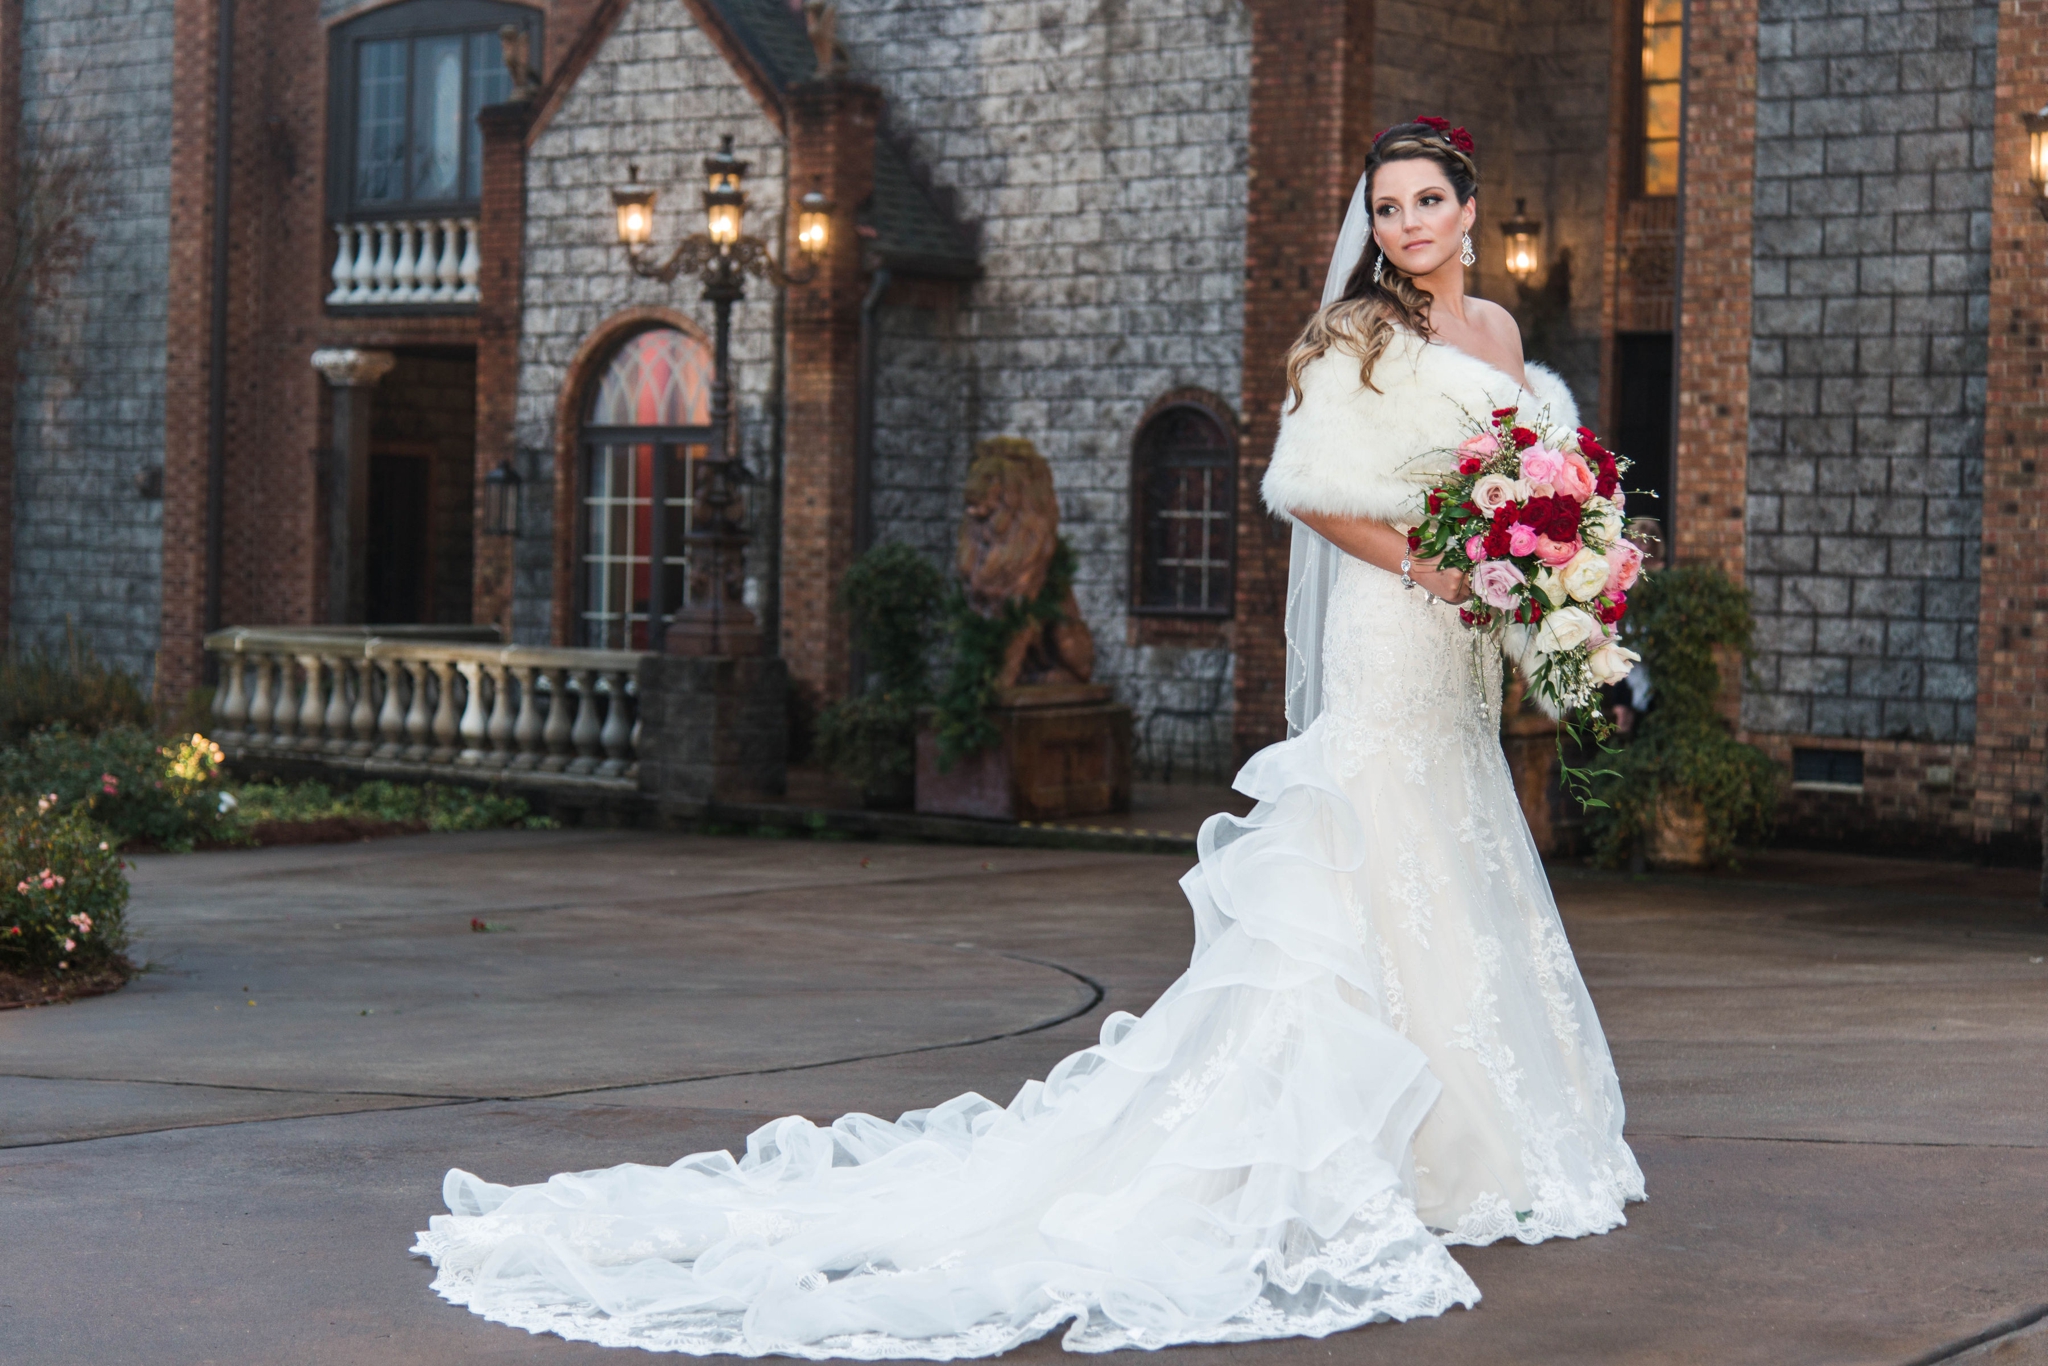 Portraits of the Bride in front of the Castle - Honolulu Oahu Hawaii Wedding Photographer